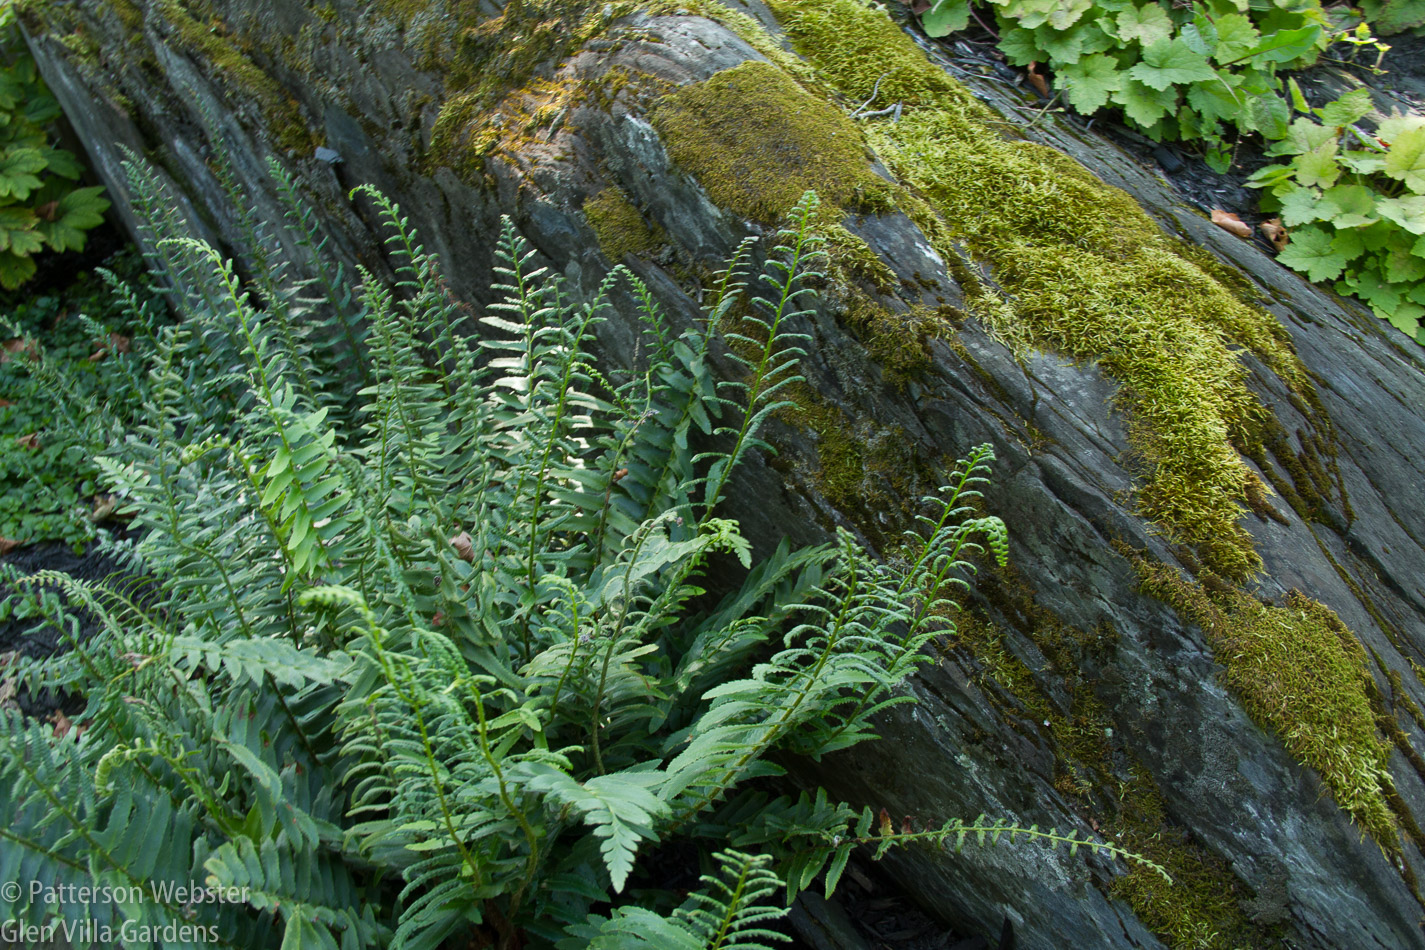 Polystichum, or Christmas fern, is found in shady woodlands throughout the Eastern Townships.